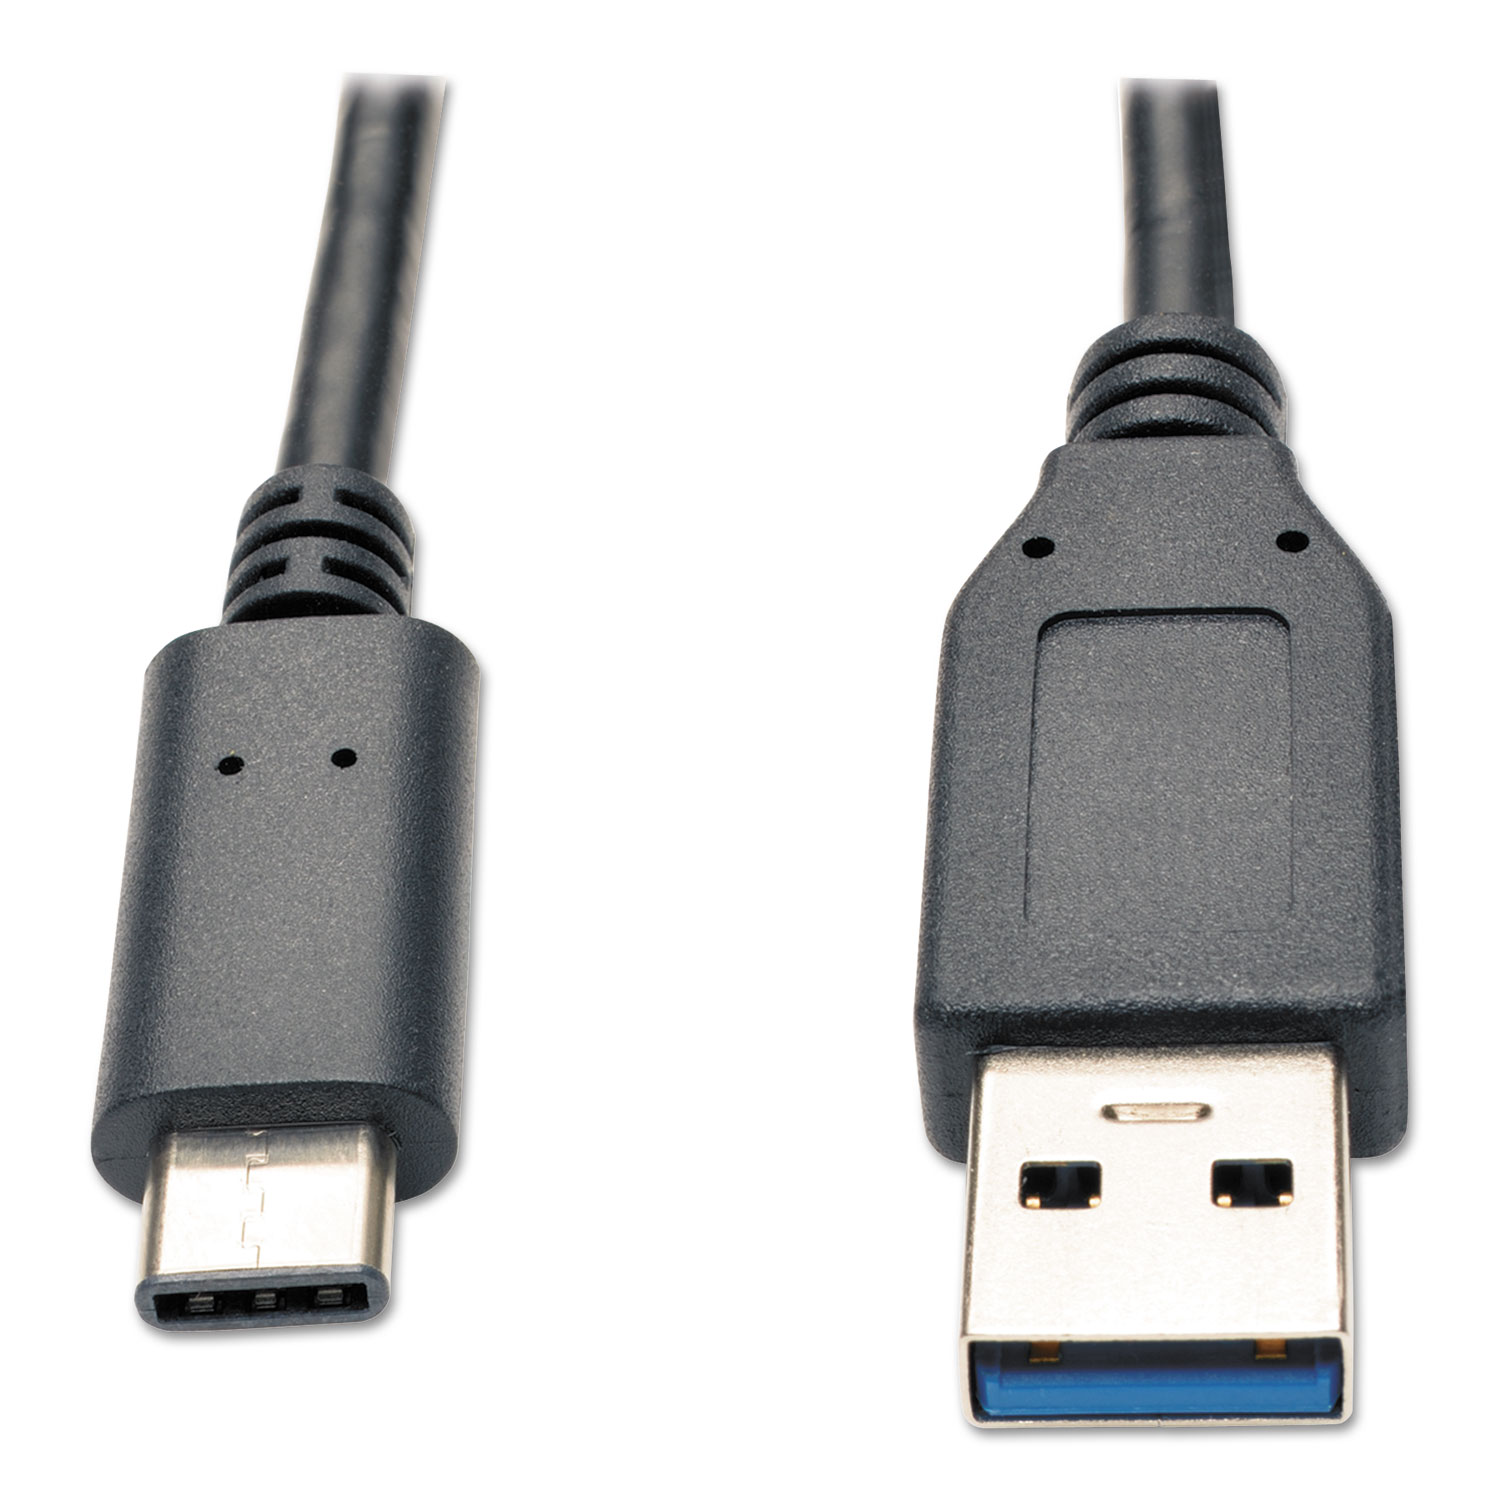 USB 3.1 Gen 1 (5 Gbps) Cable, USB Type-C (USB-C) to USB Type-A (M/M), 3 ft.